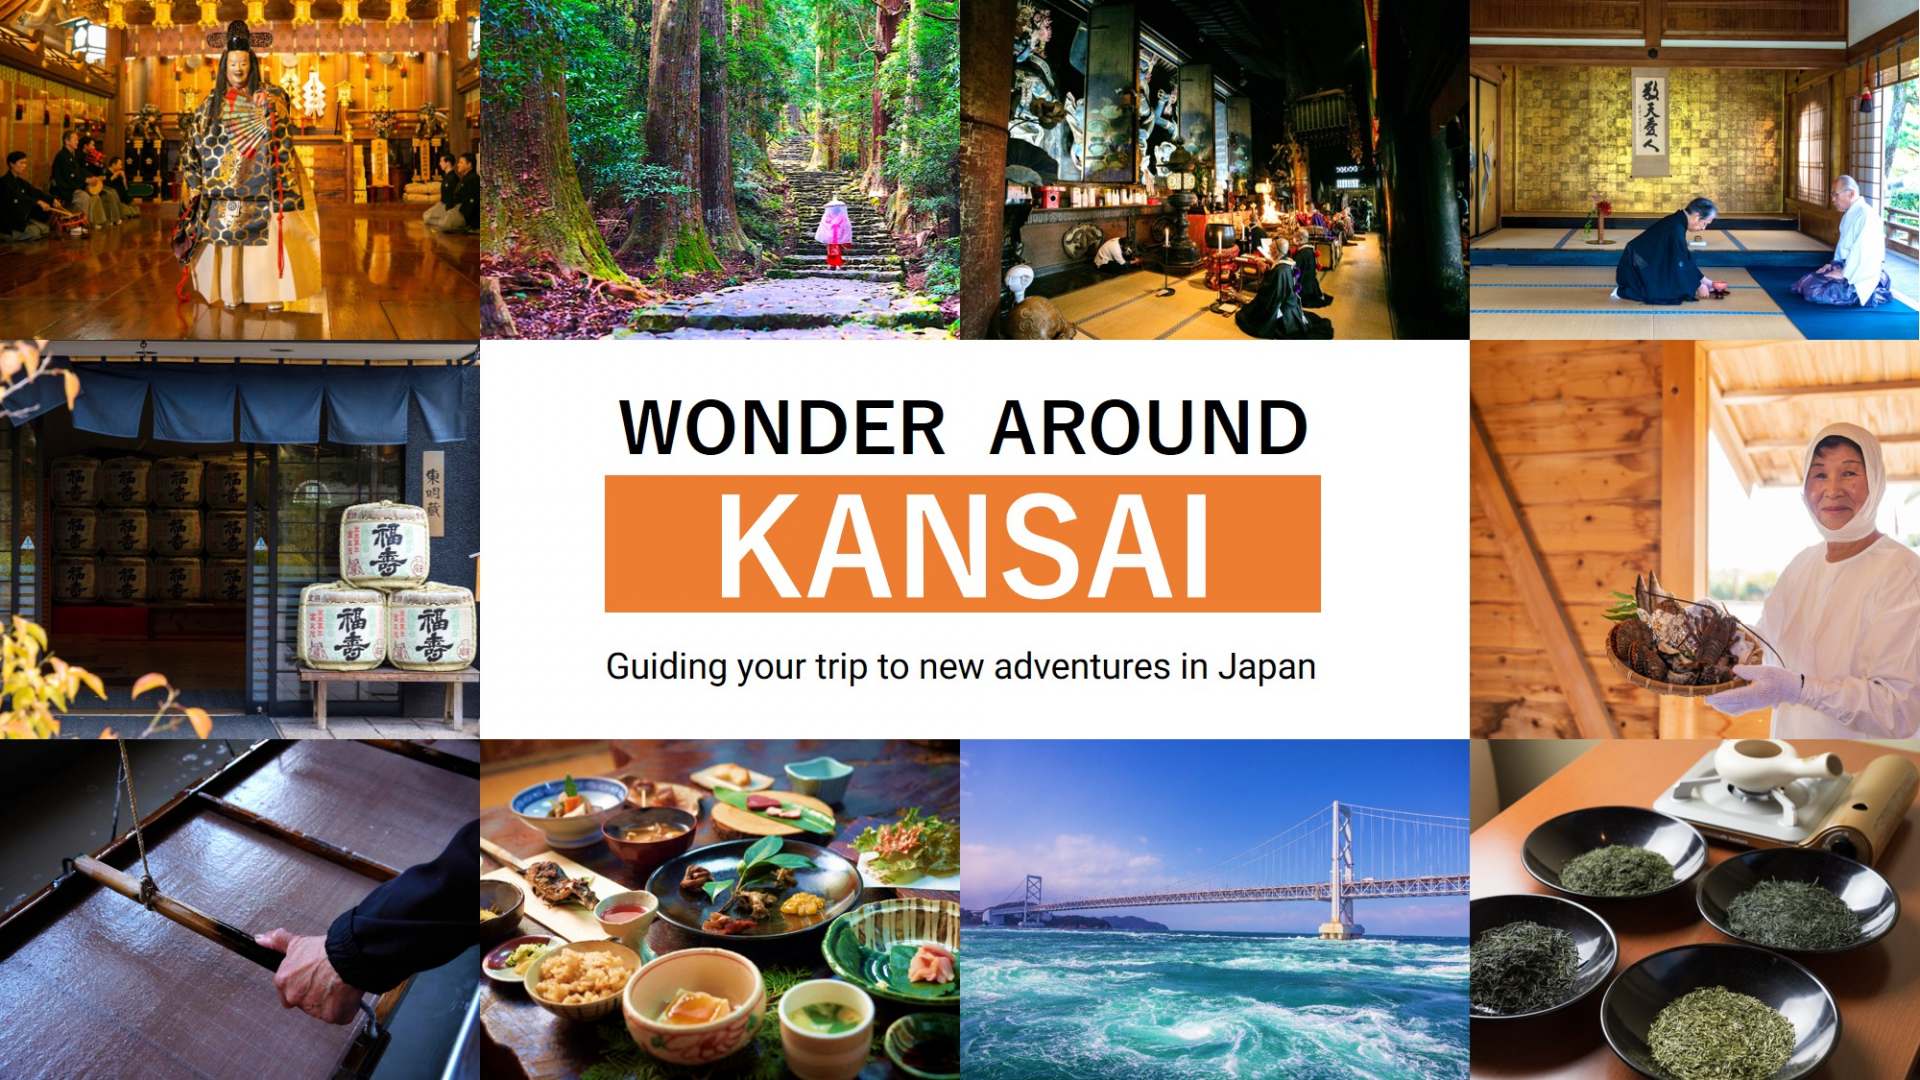 Special site "WONDER AROUND KANSAI" full of special itinerary ideas here in Kansai is now available.